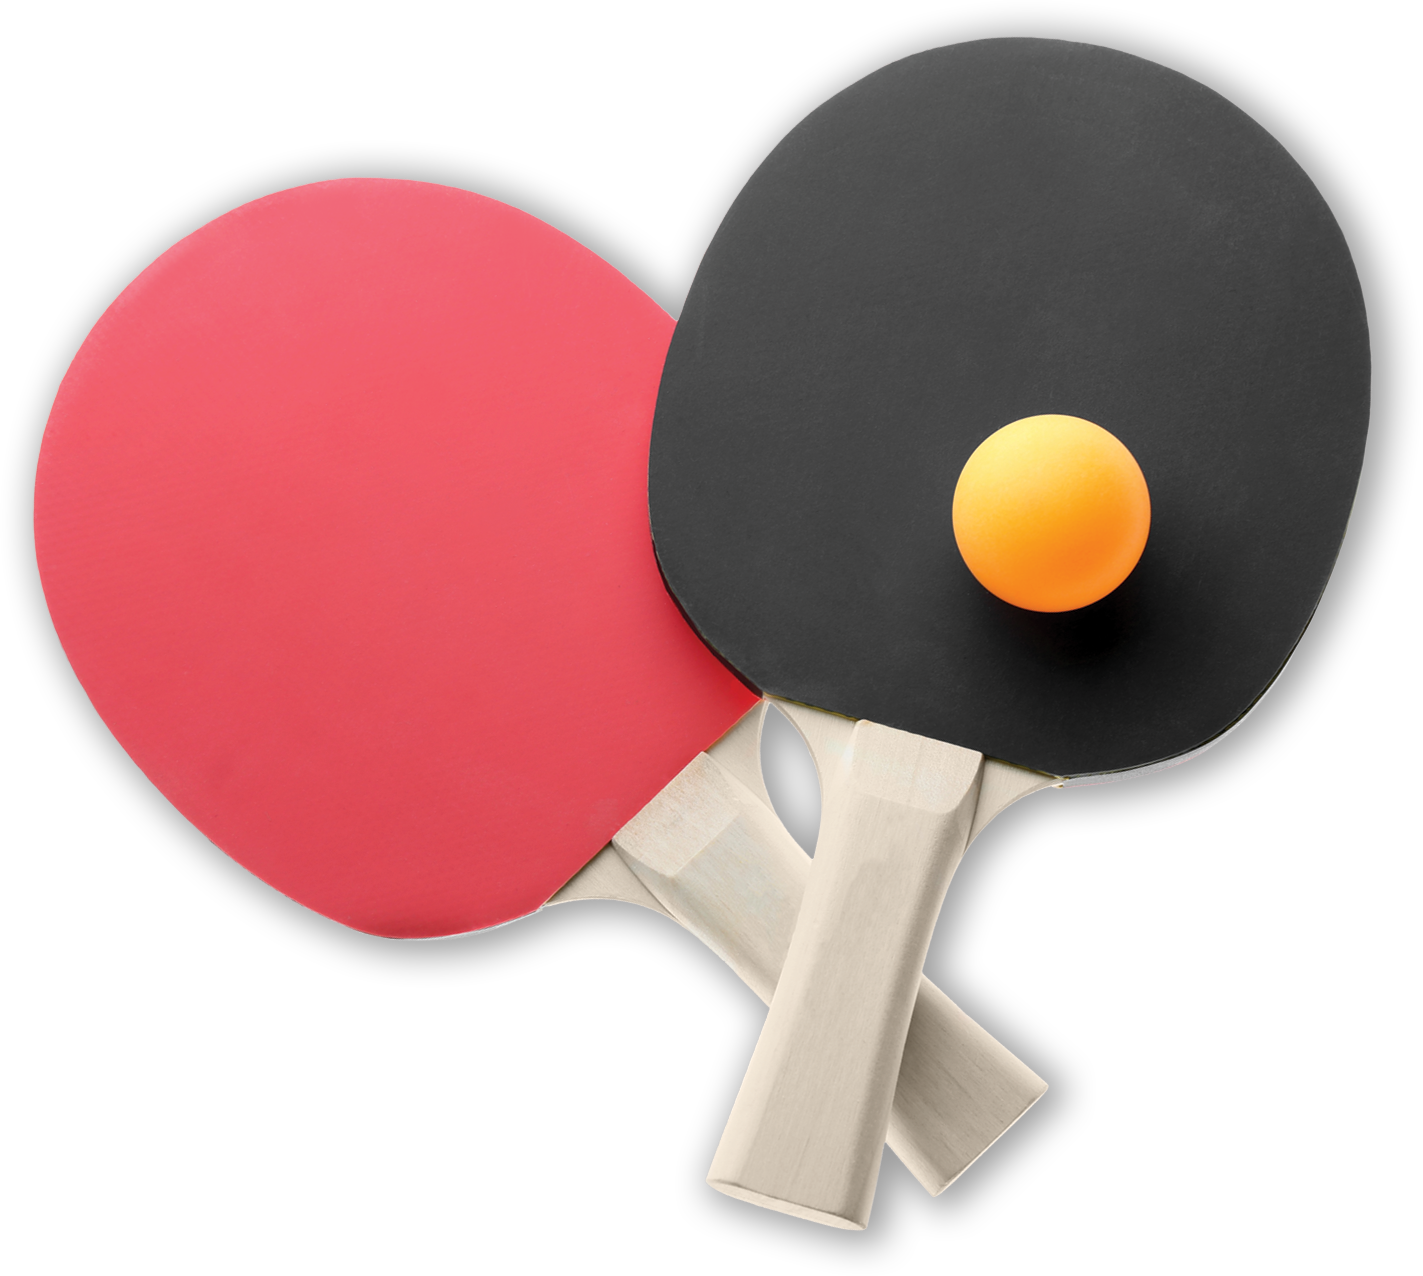 Table Tennis Rackets and Ball